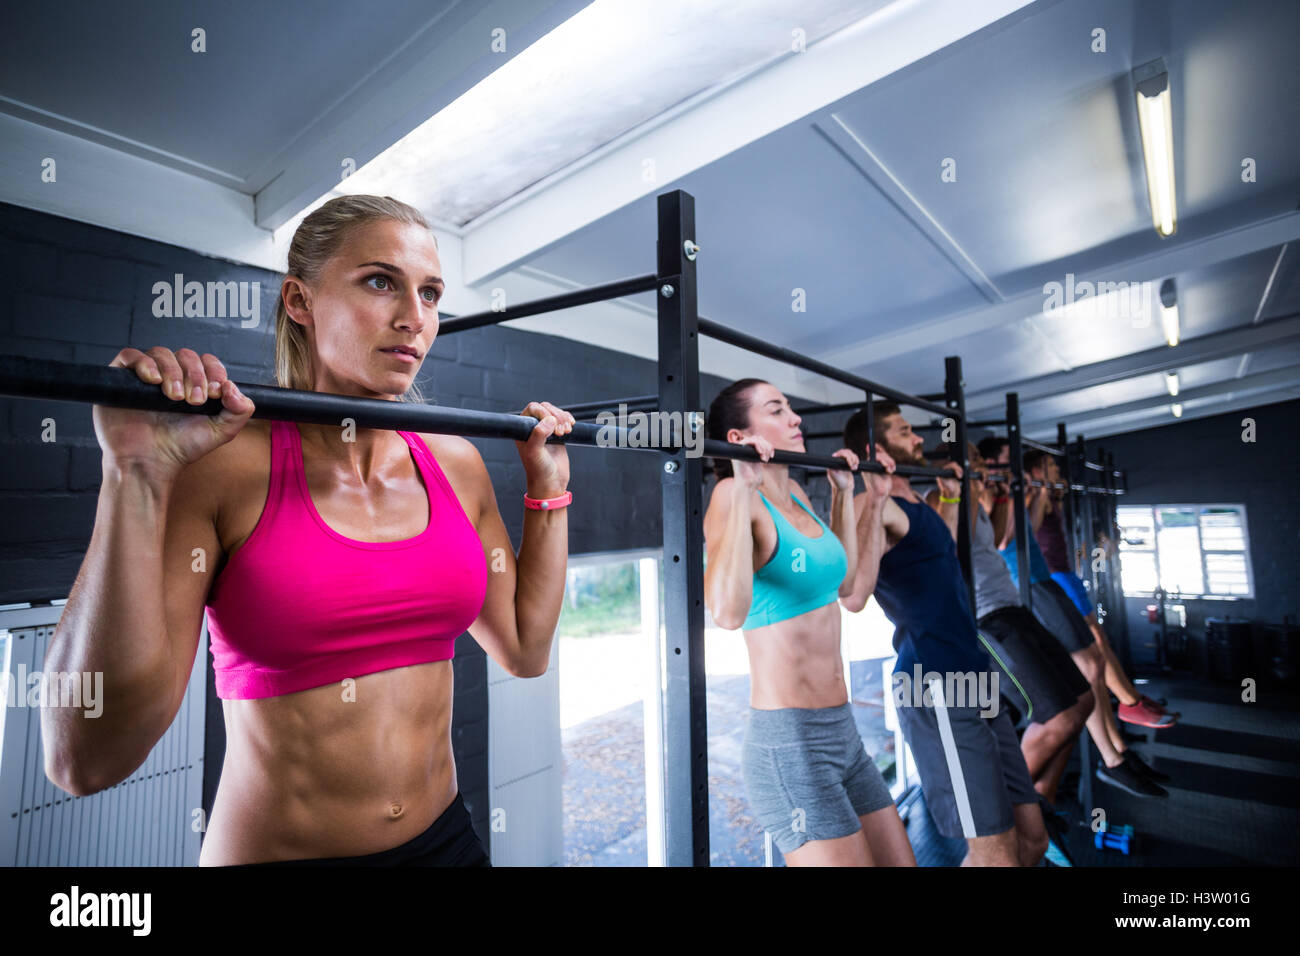 Athletes doing chin-ups in gym Stock Photo